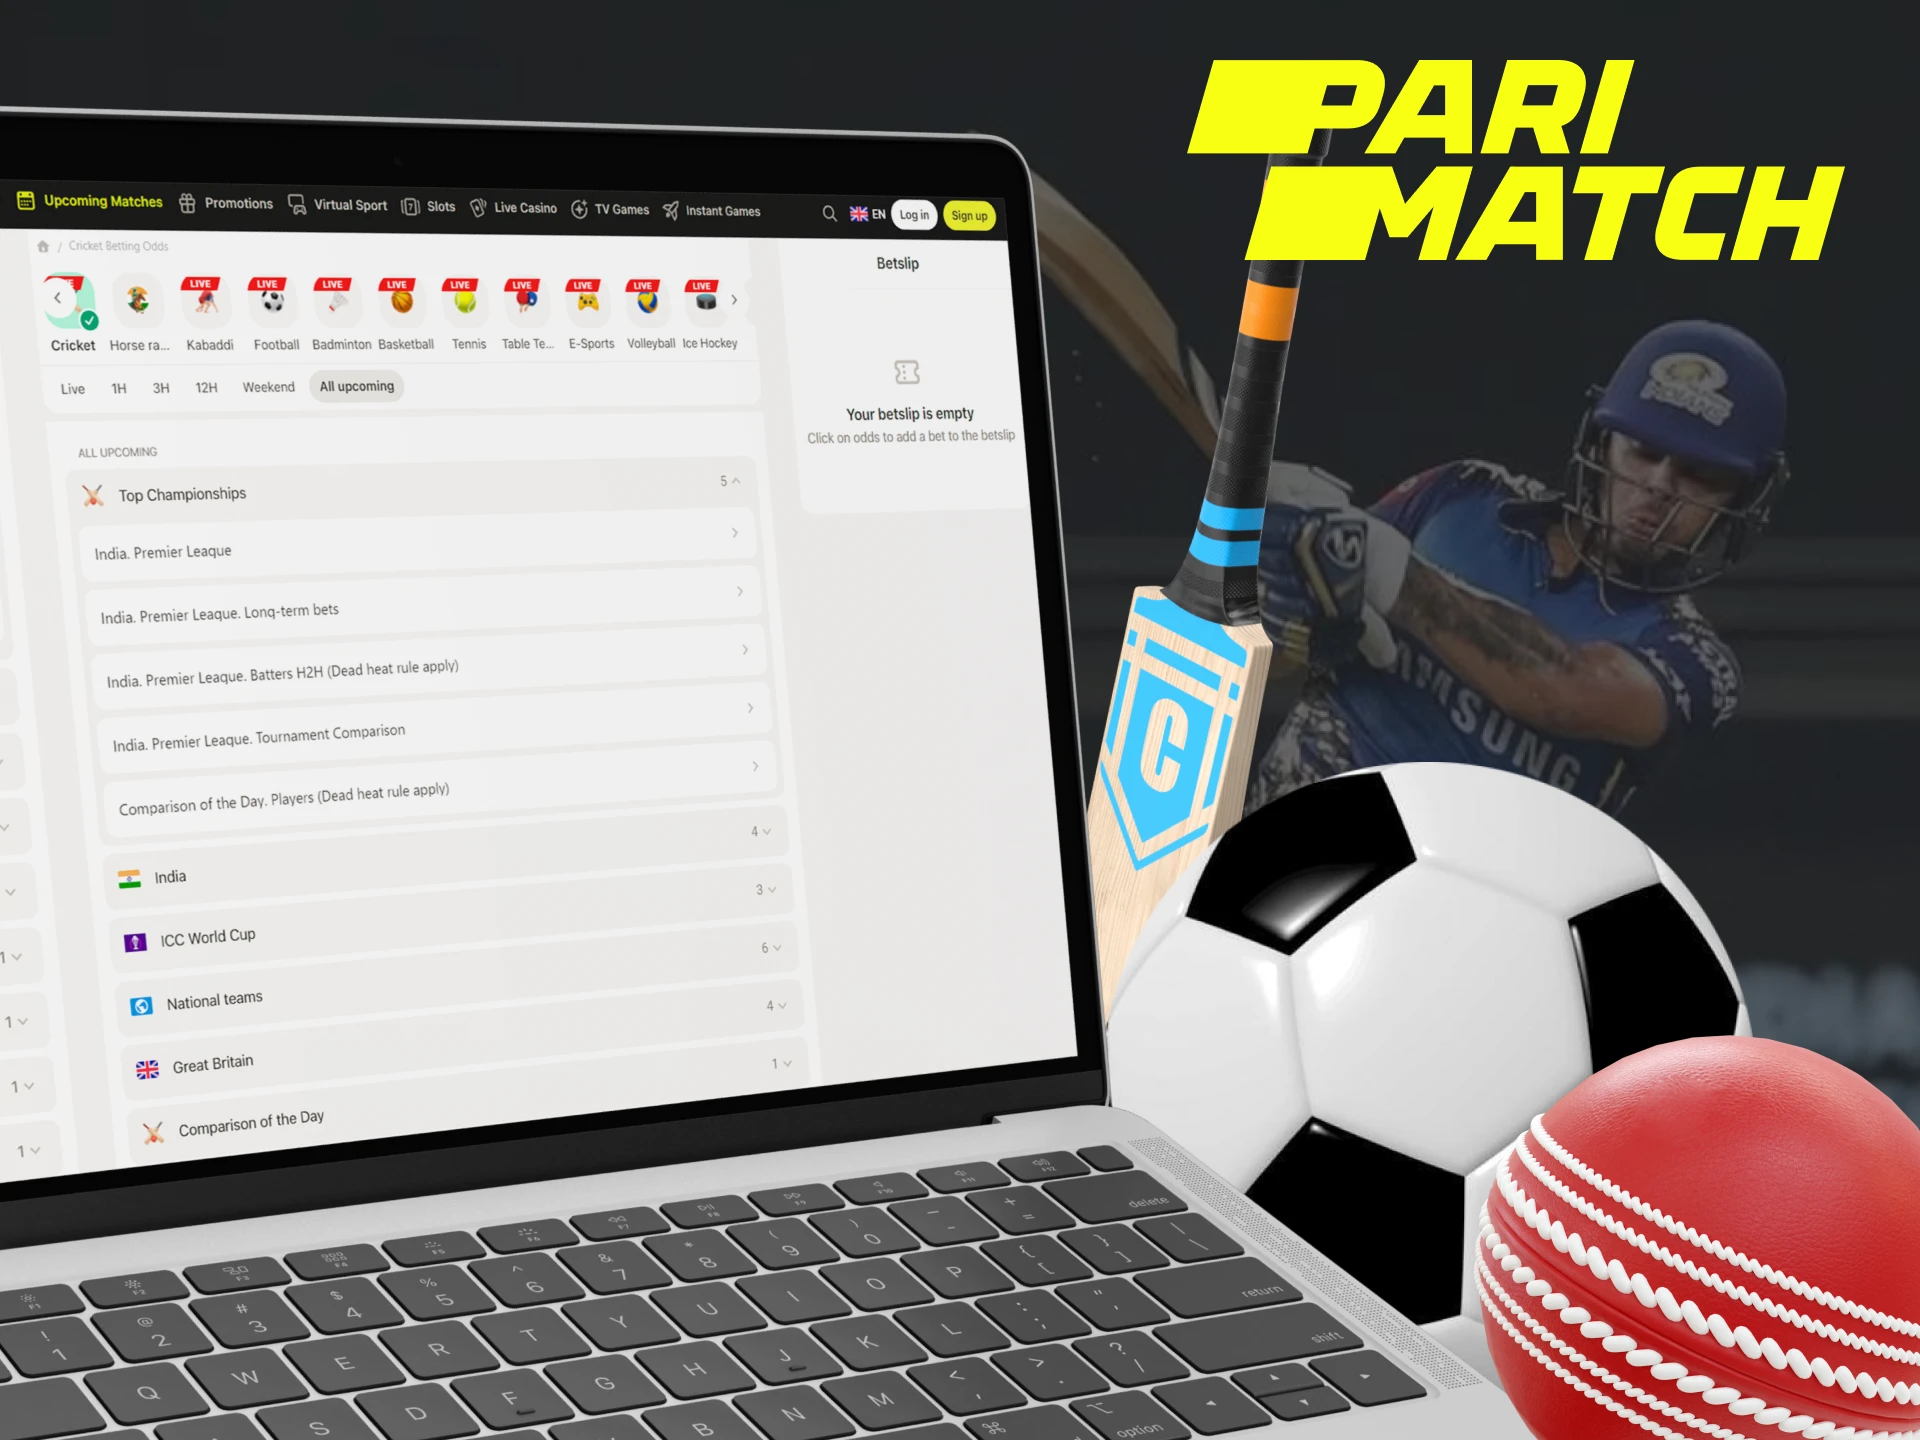 Parimatch offers many sports for betting.